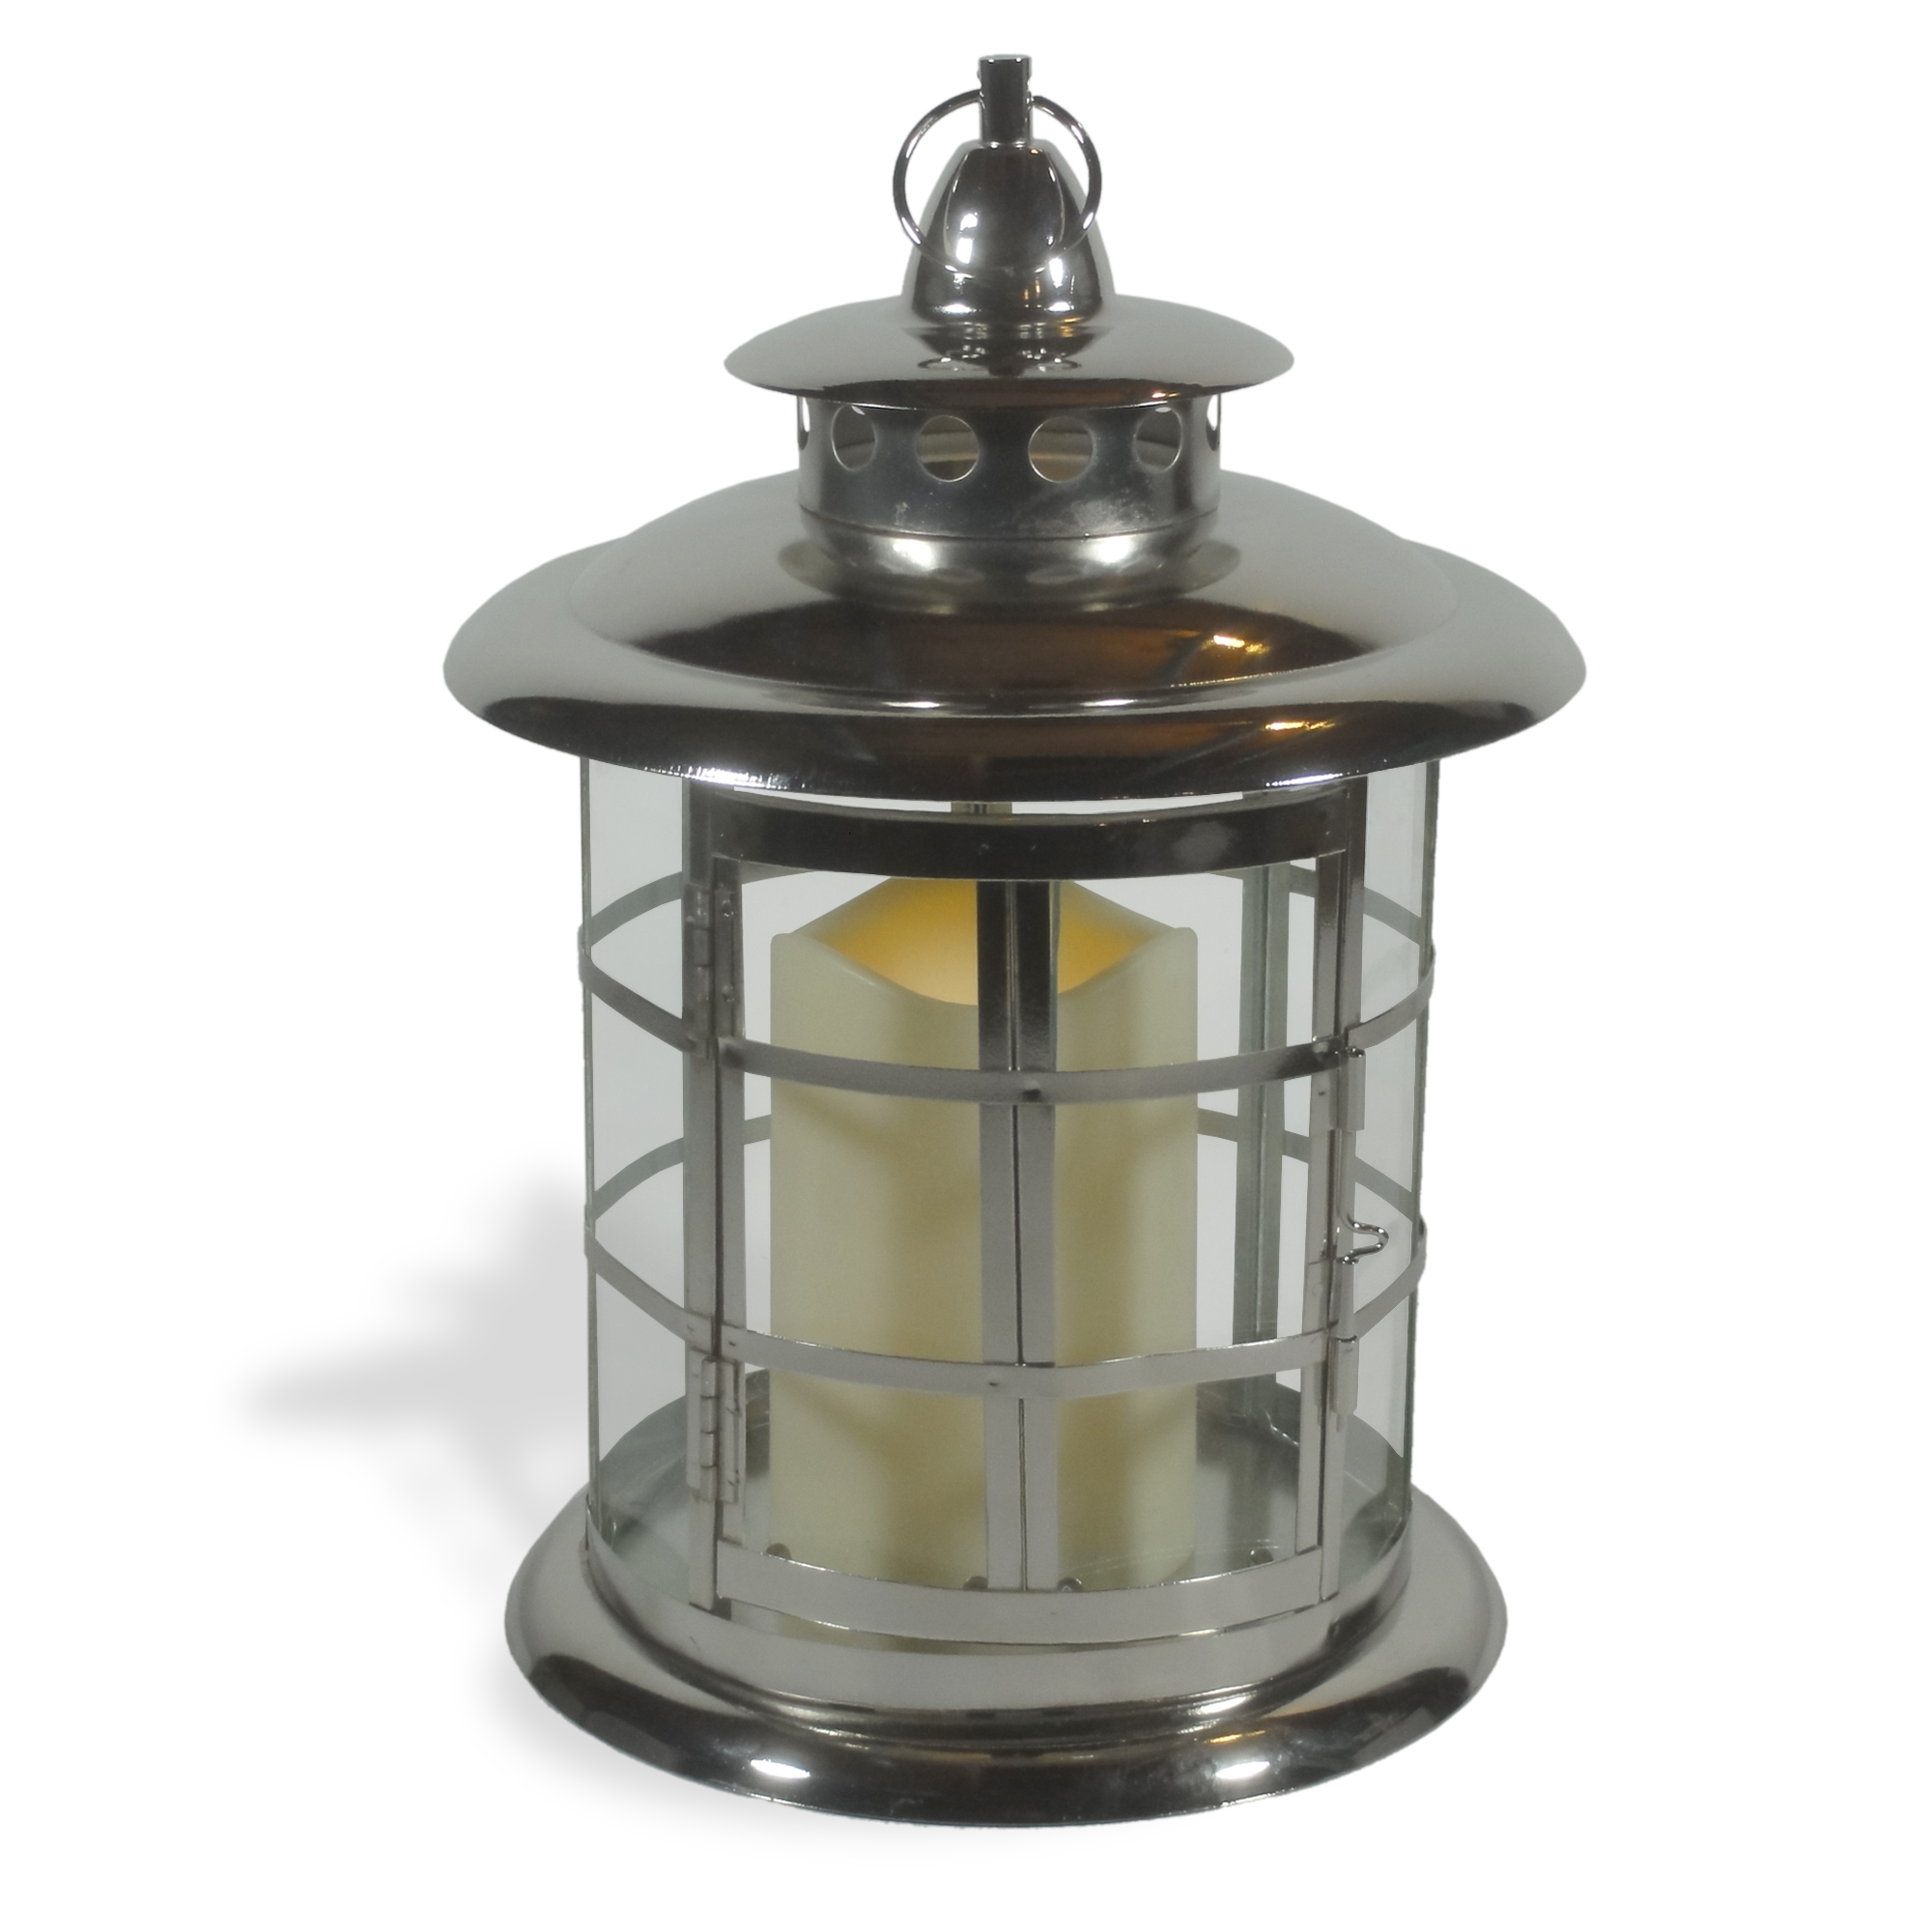 Pacific D&eacute;cor 11"H x 7" Round Metal and Glass Lantern with 3x4" LED Candle